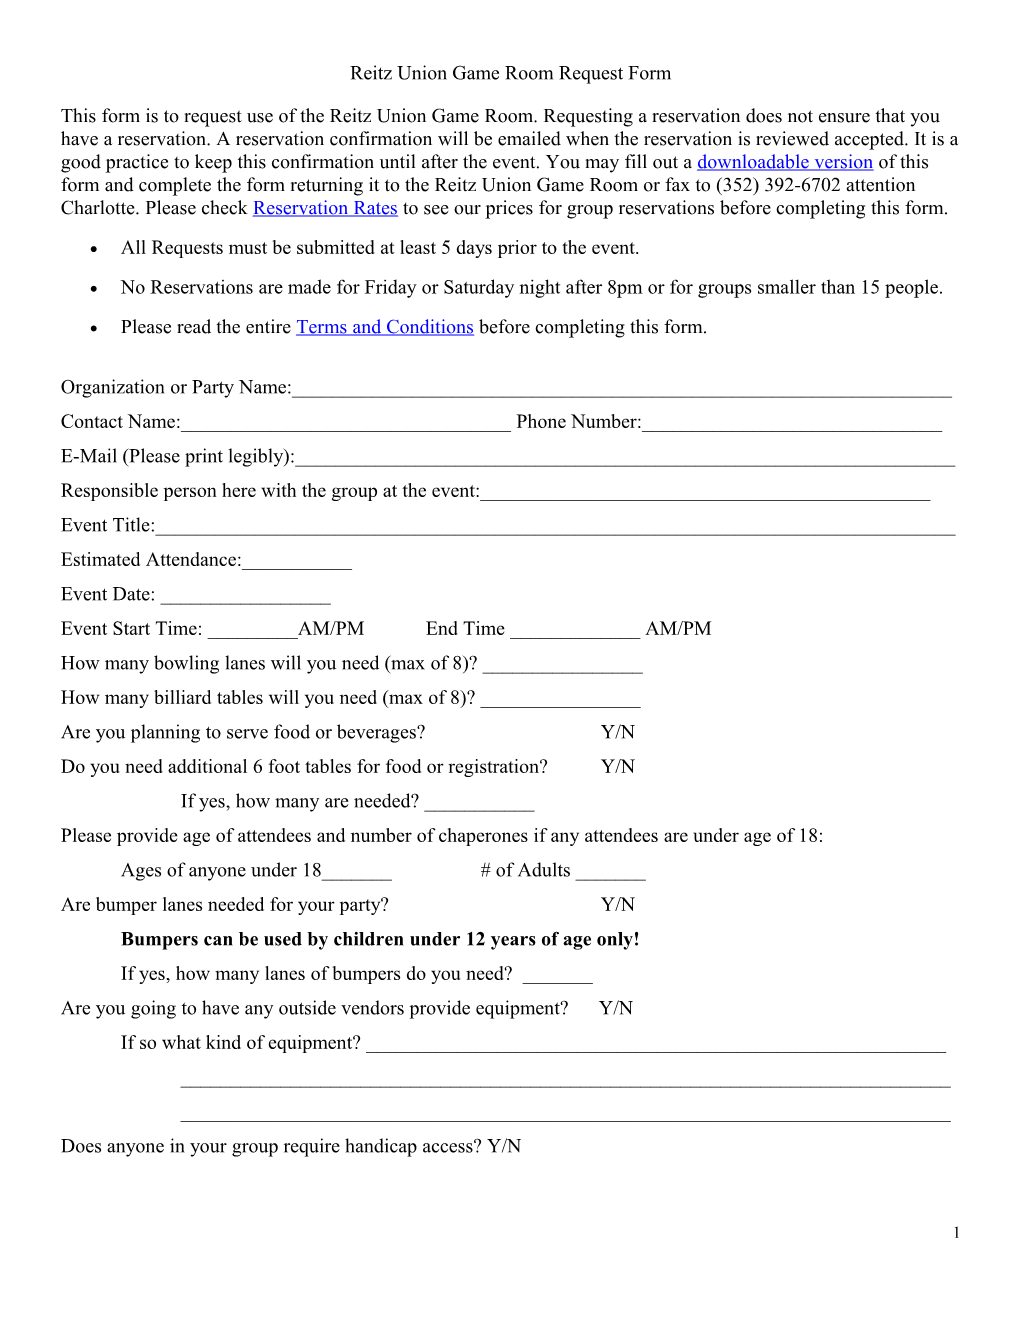 Reitz Union Game Room Request Form